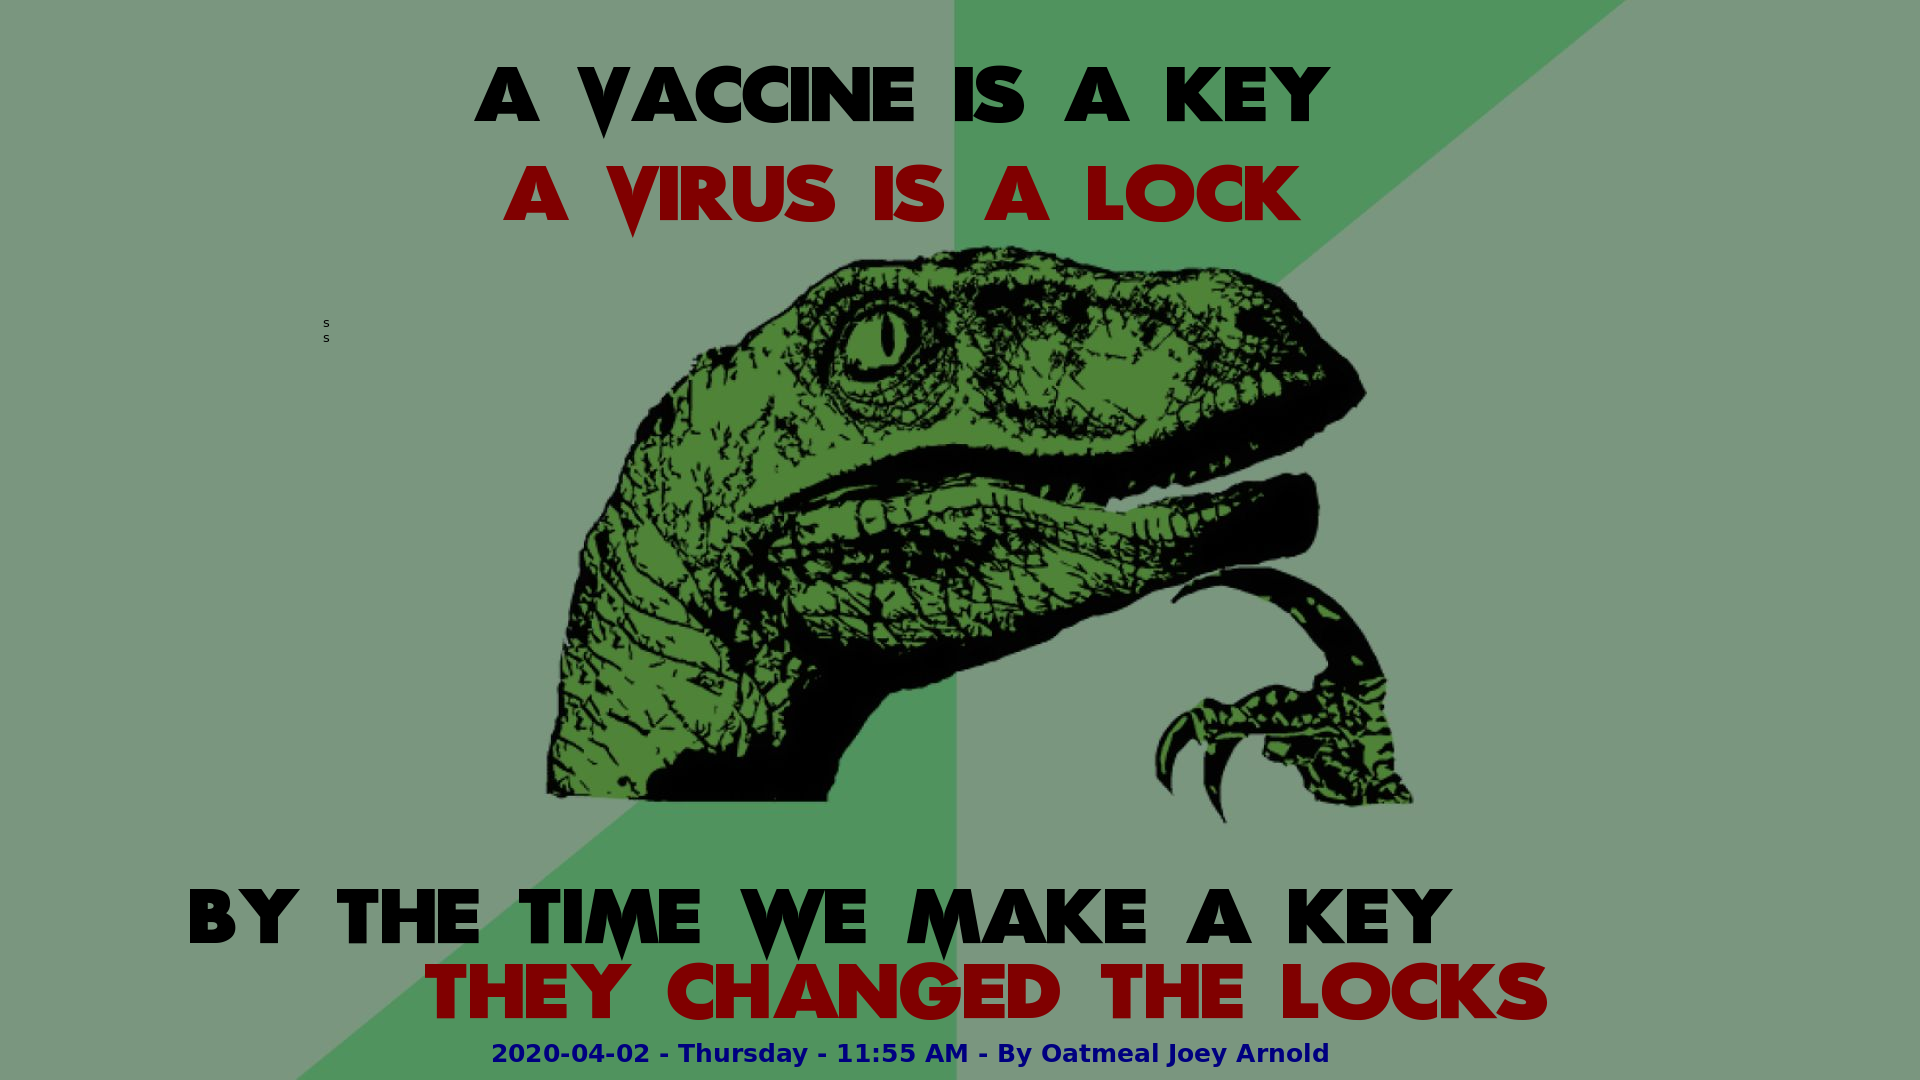 Philosophy Dinosaur A vaccine is a key, a virus is a lock. By the time we make a key, they changed the locks 2020-04-02 - Thursday - 11:55 AM.png